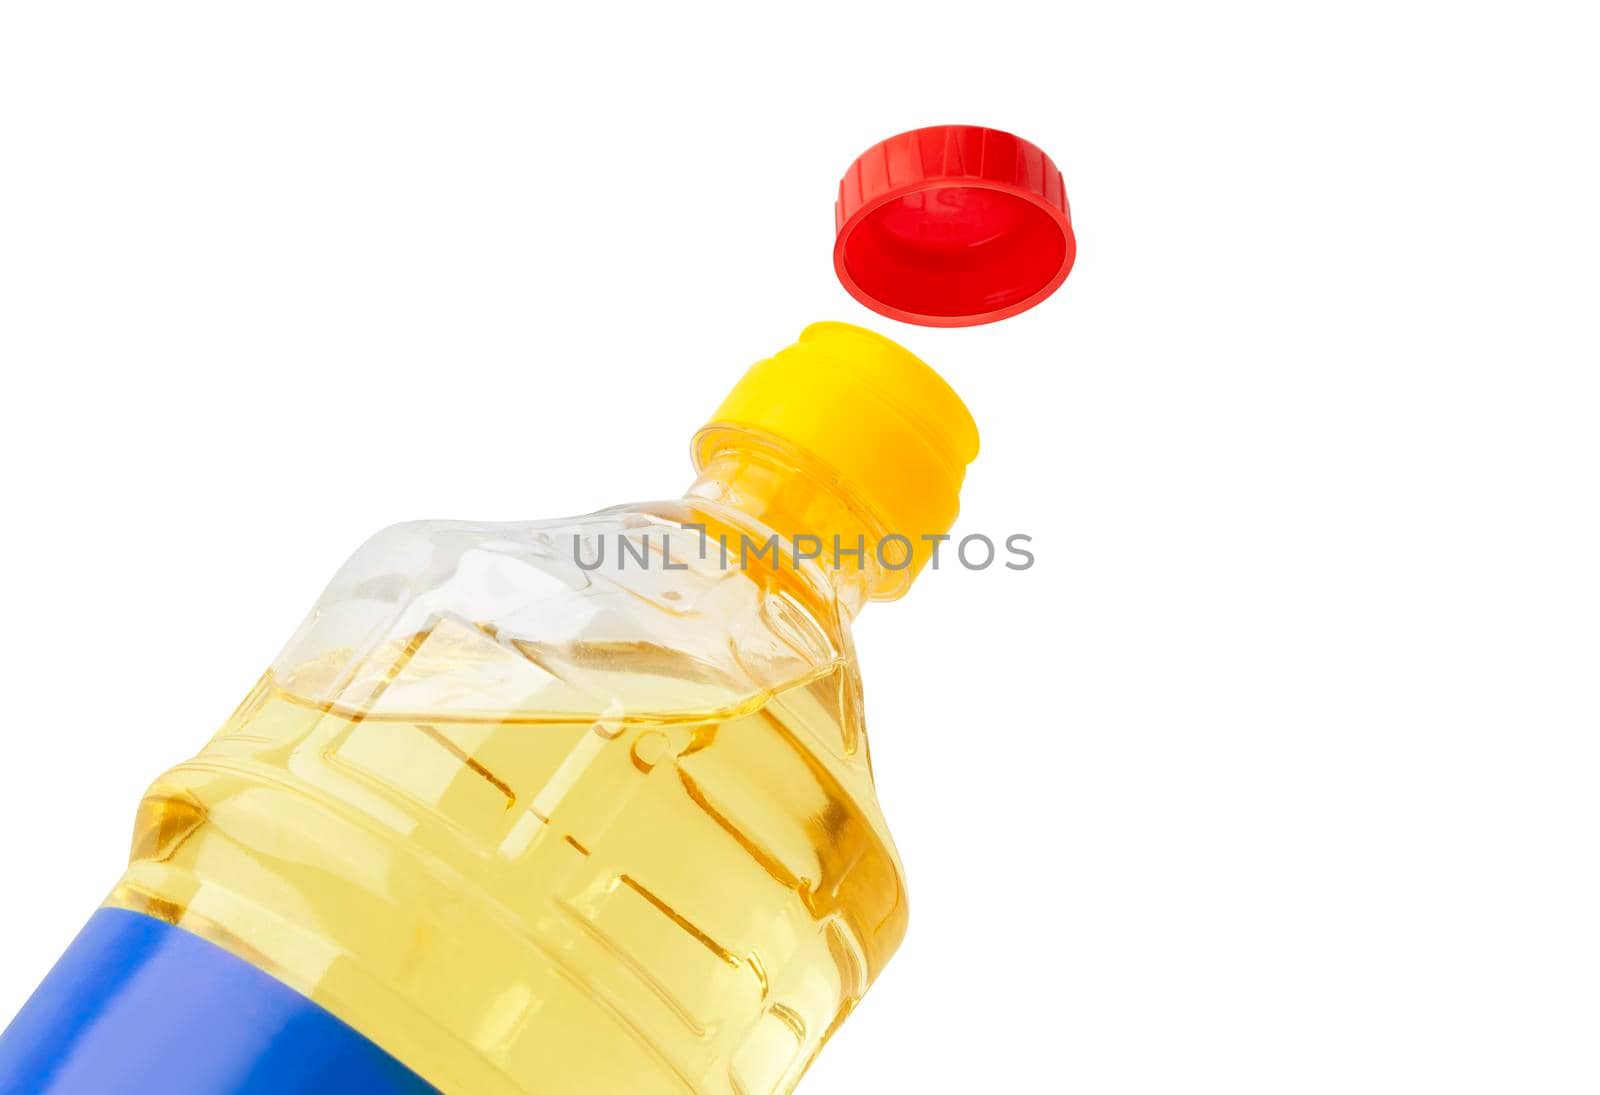 Oil in an opened plastic bottle. Isolated on white background. With clipping path